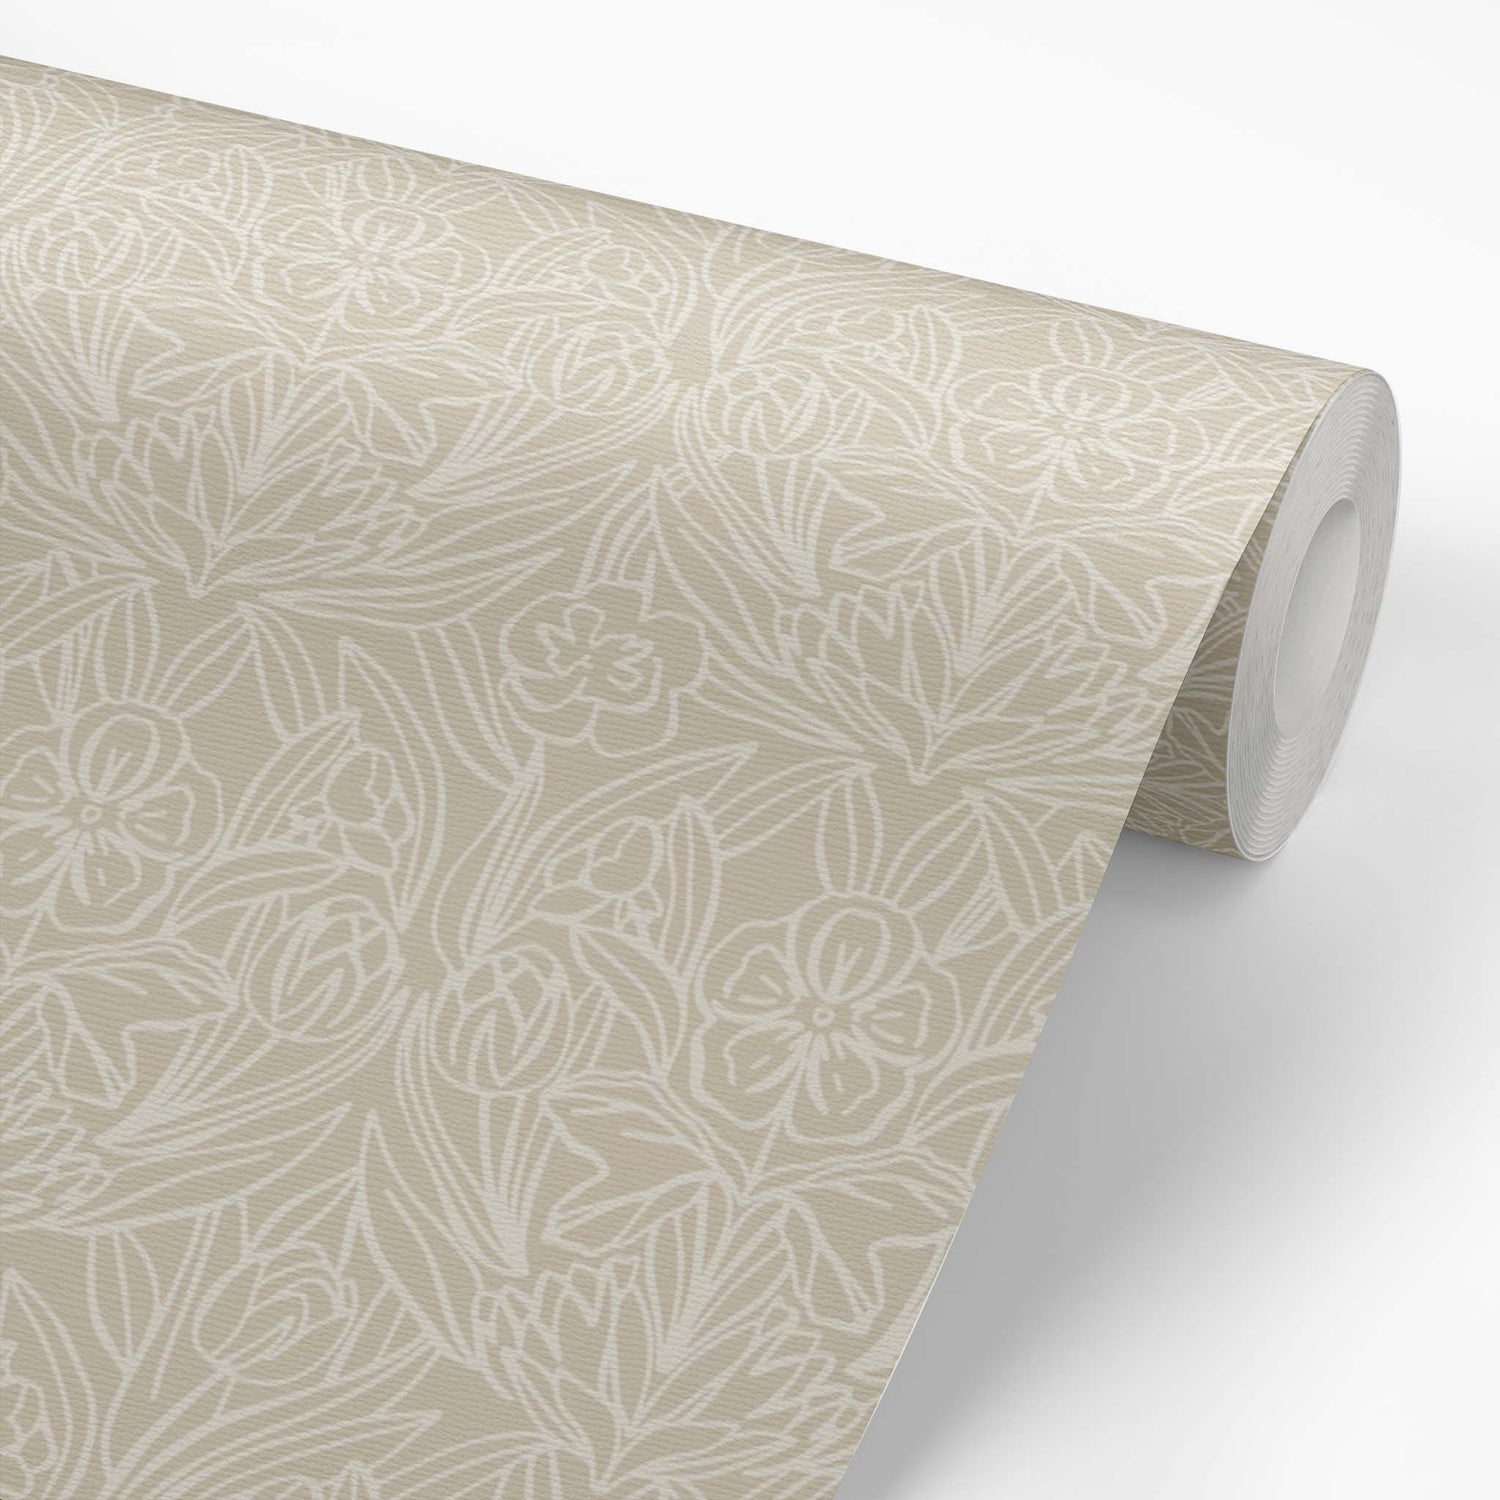 Featuring a subtle combination of florals, this cream wallpaper adds a touch of elegance shown on this wallpaper roll.